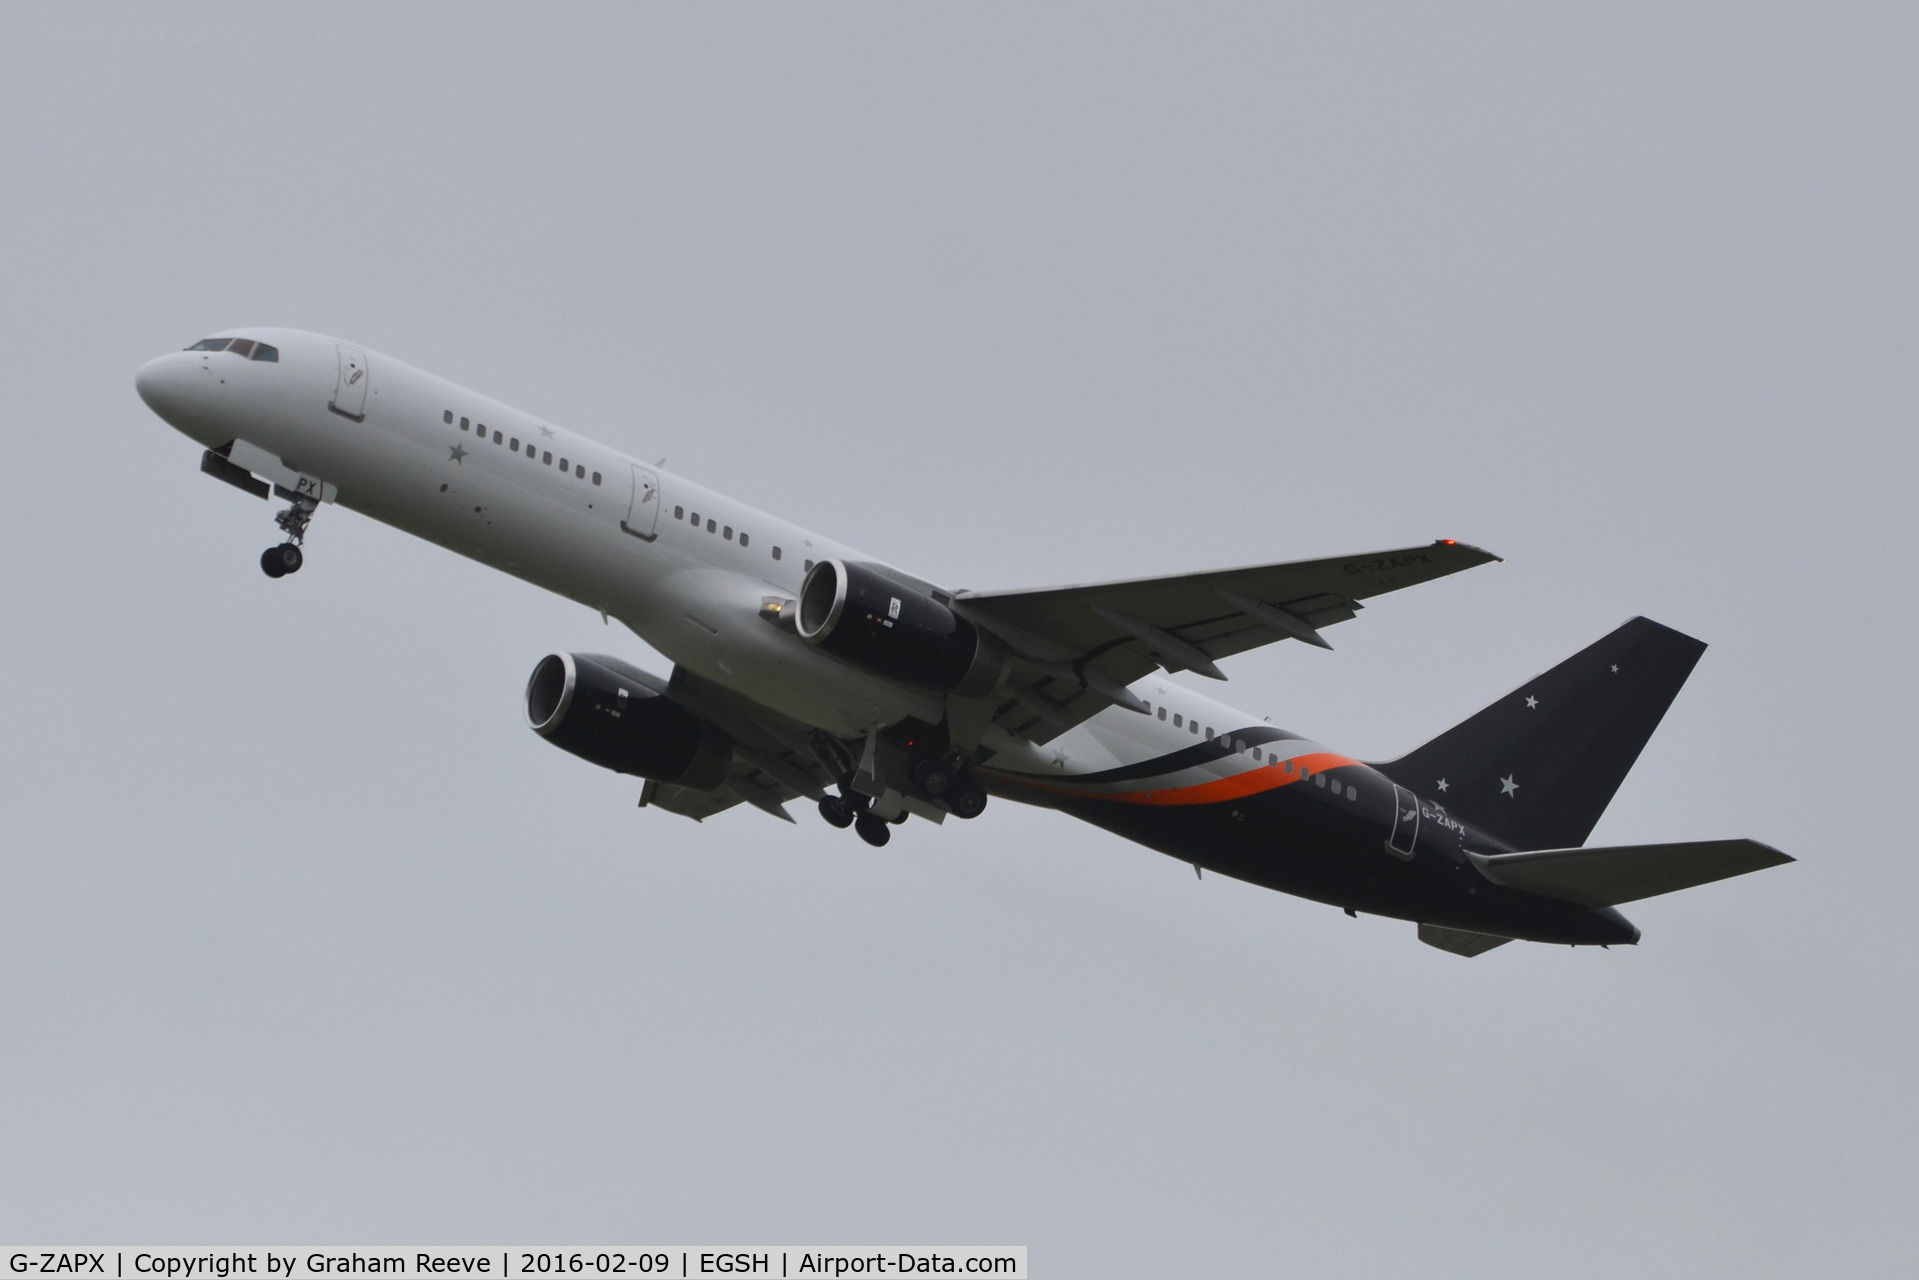 G-ZAPX, 2000 Boeing 757-256 C/N 29309, Departing from Norwich with a new colour scheme.